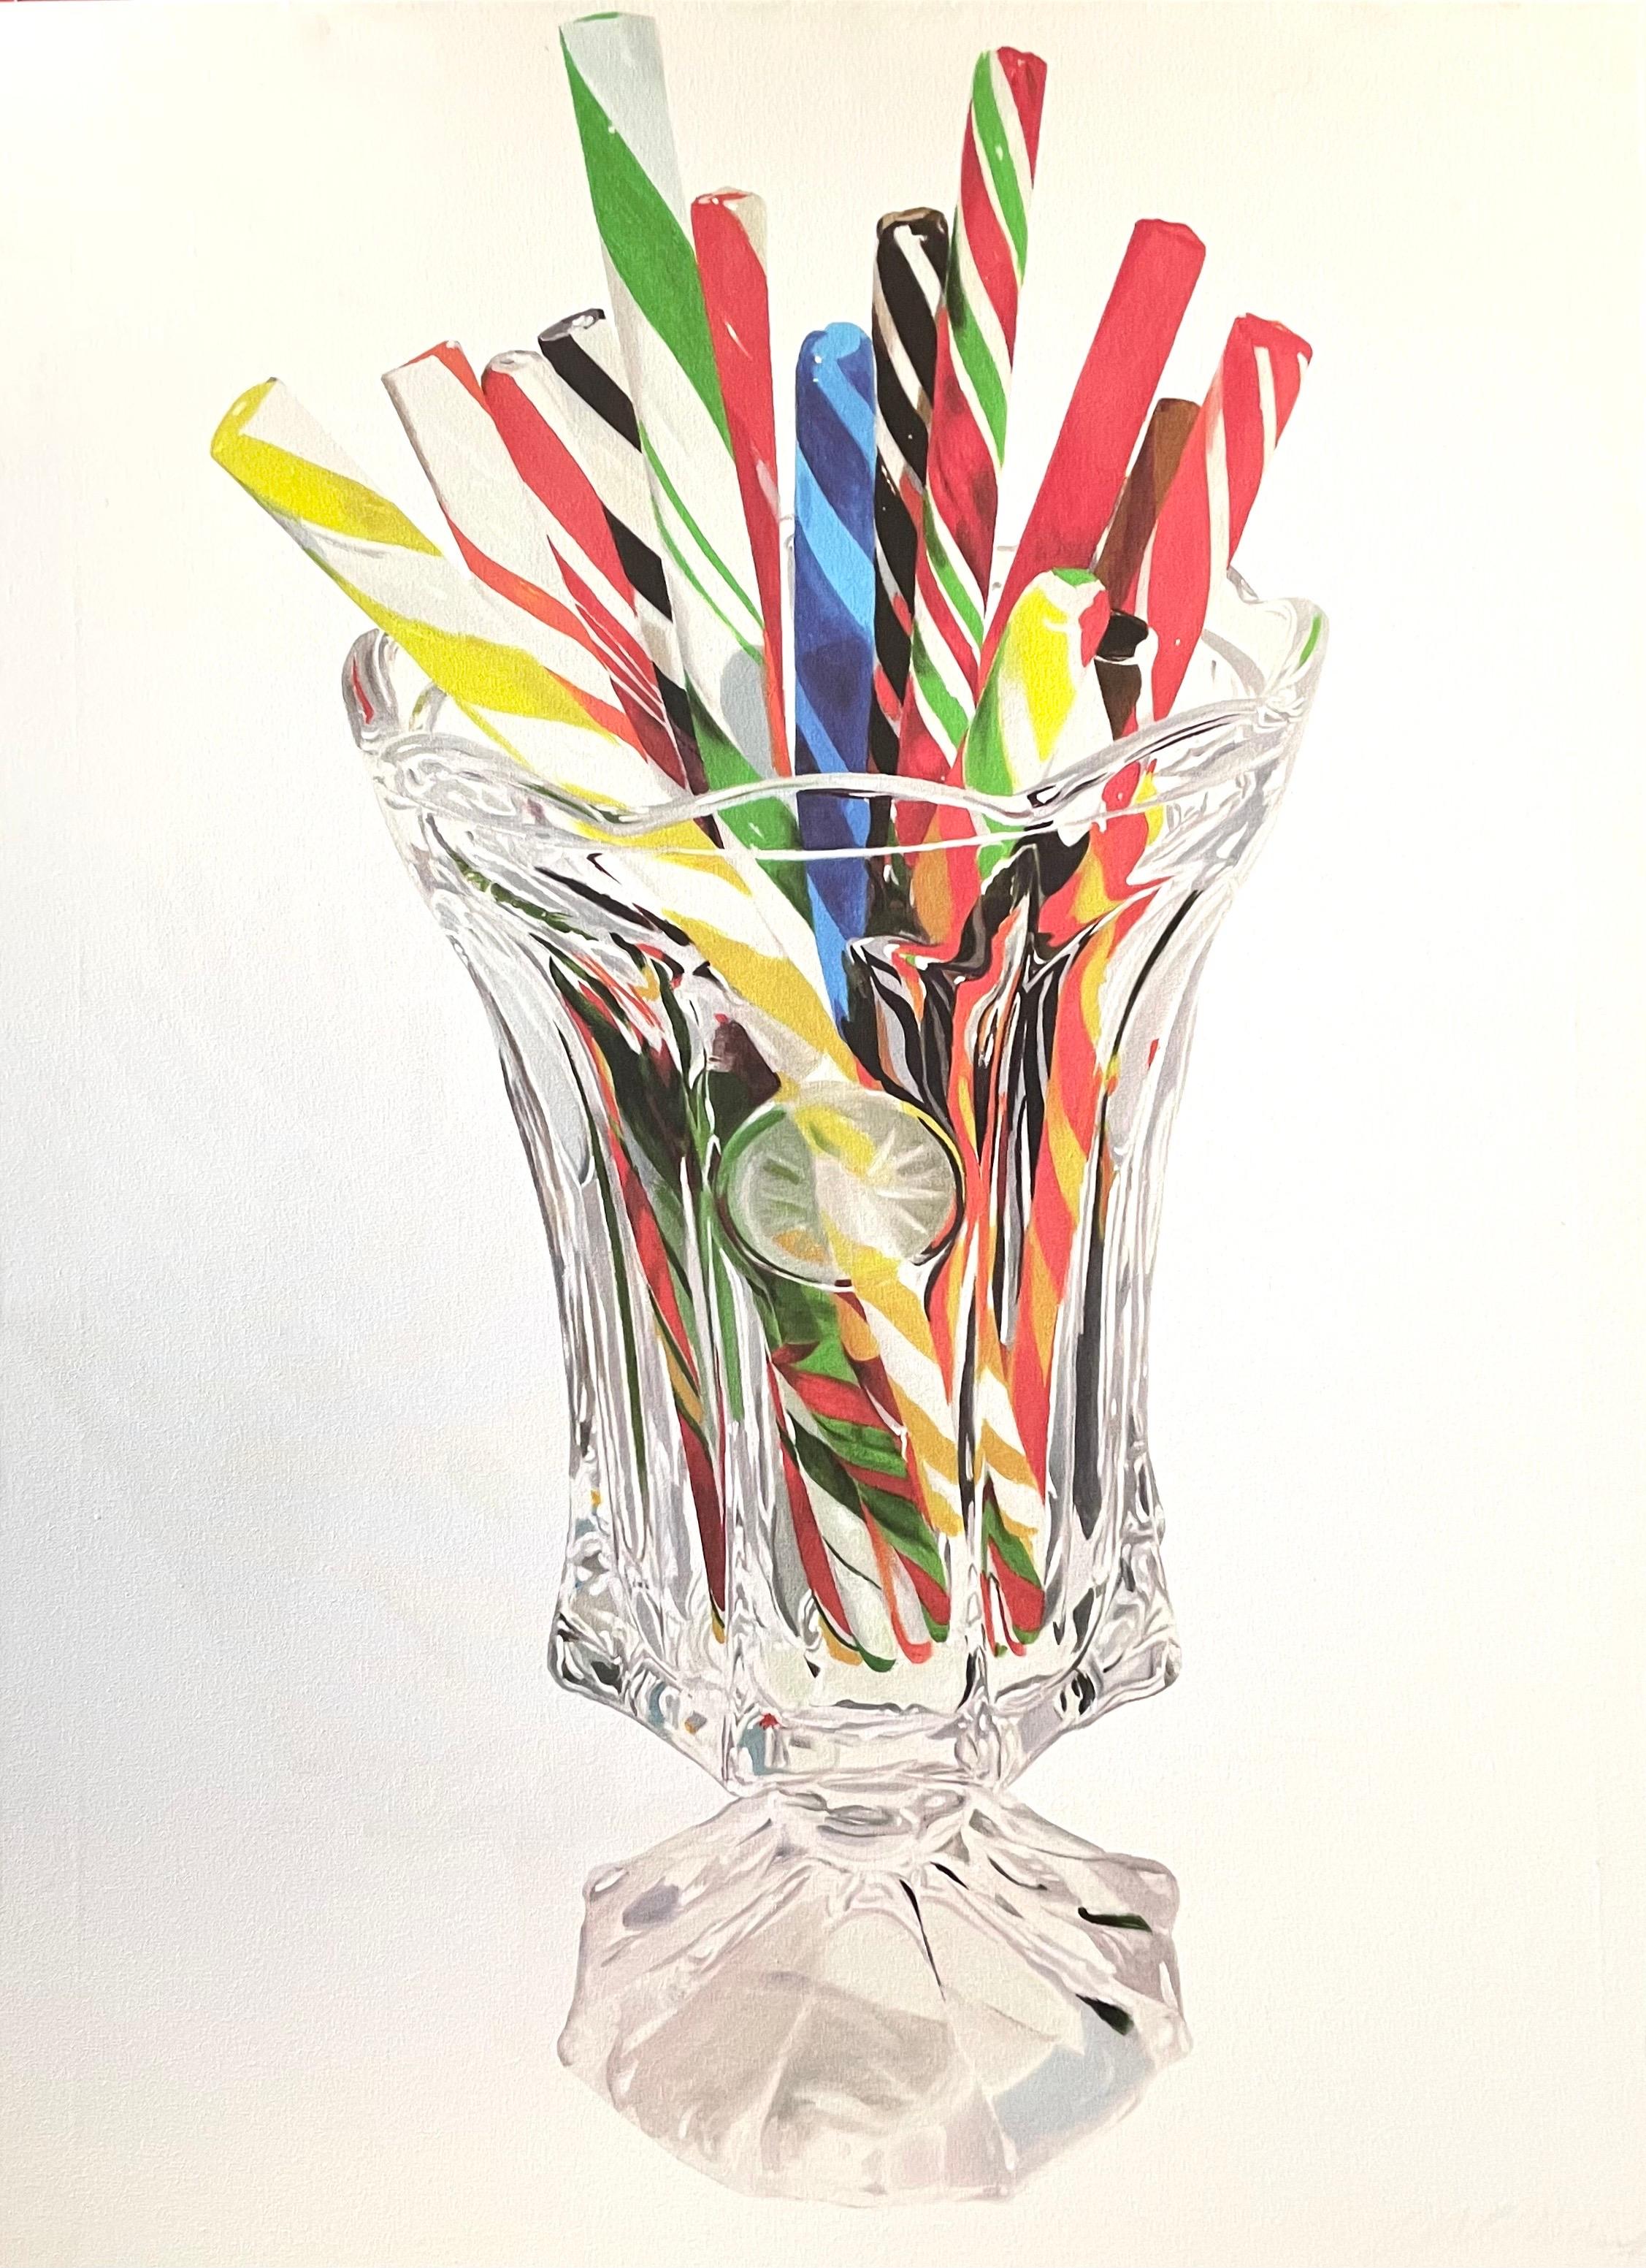 Charles Wildbank Figurative Painting - Large Still Life Photorealism Acrylic Painting Candy Canes in Vase Photo Realist